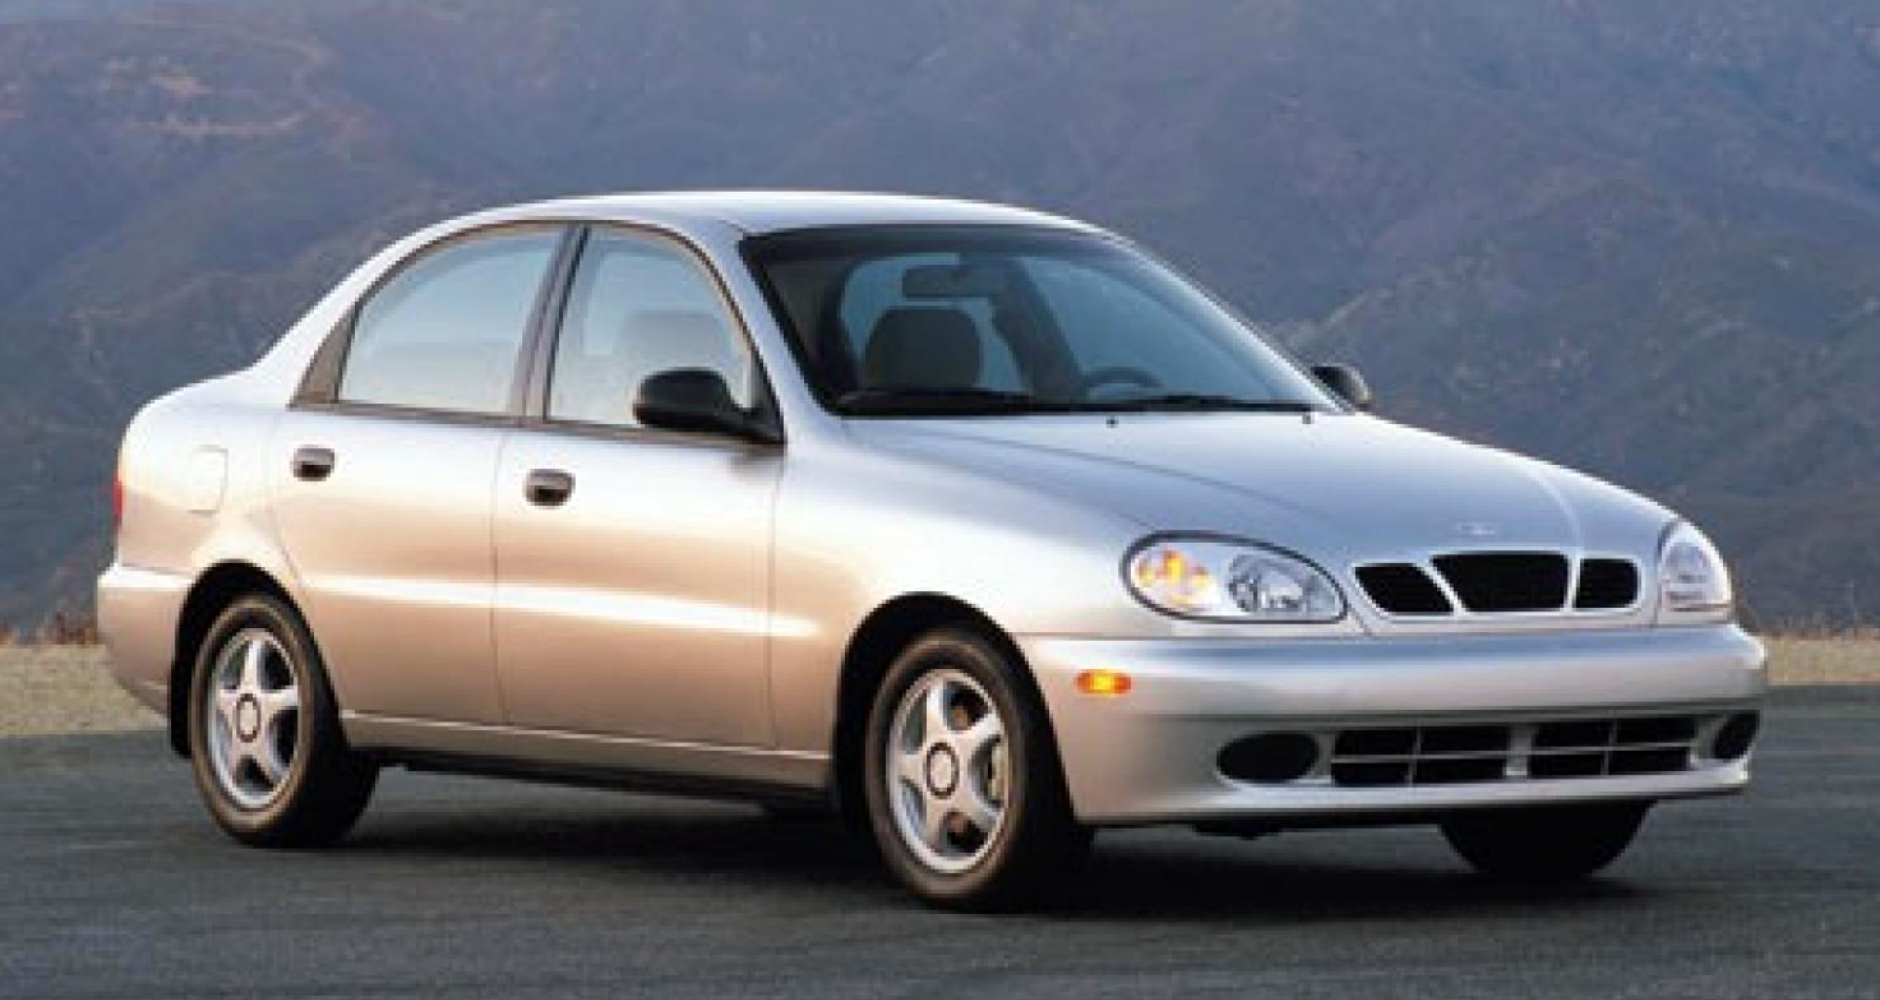 Quick Look: 2002 Daewoo Lanos | The Daily Drive | Consumer Guide® The